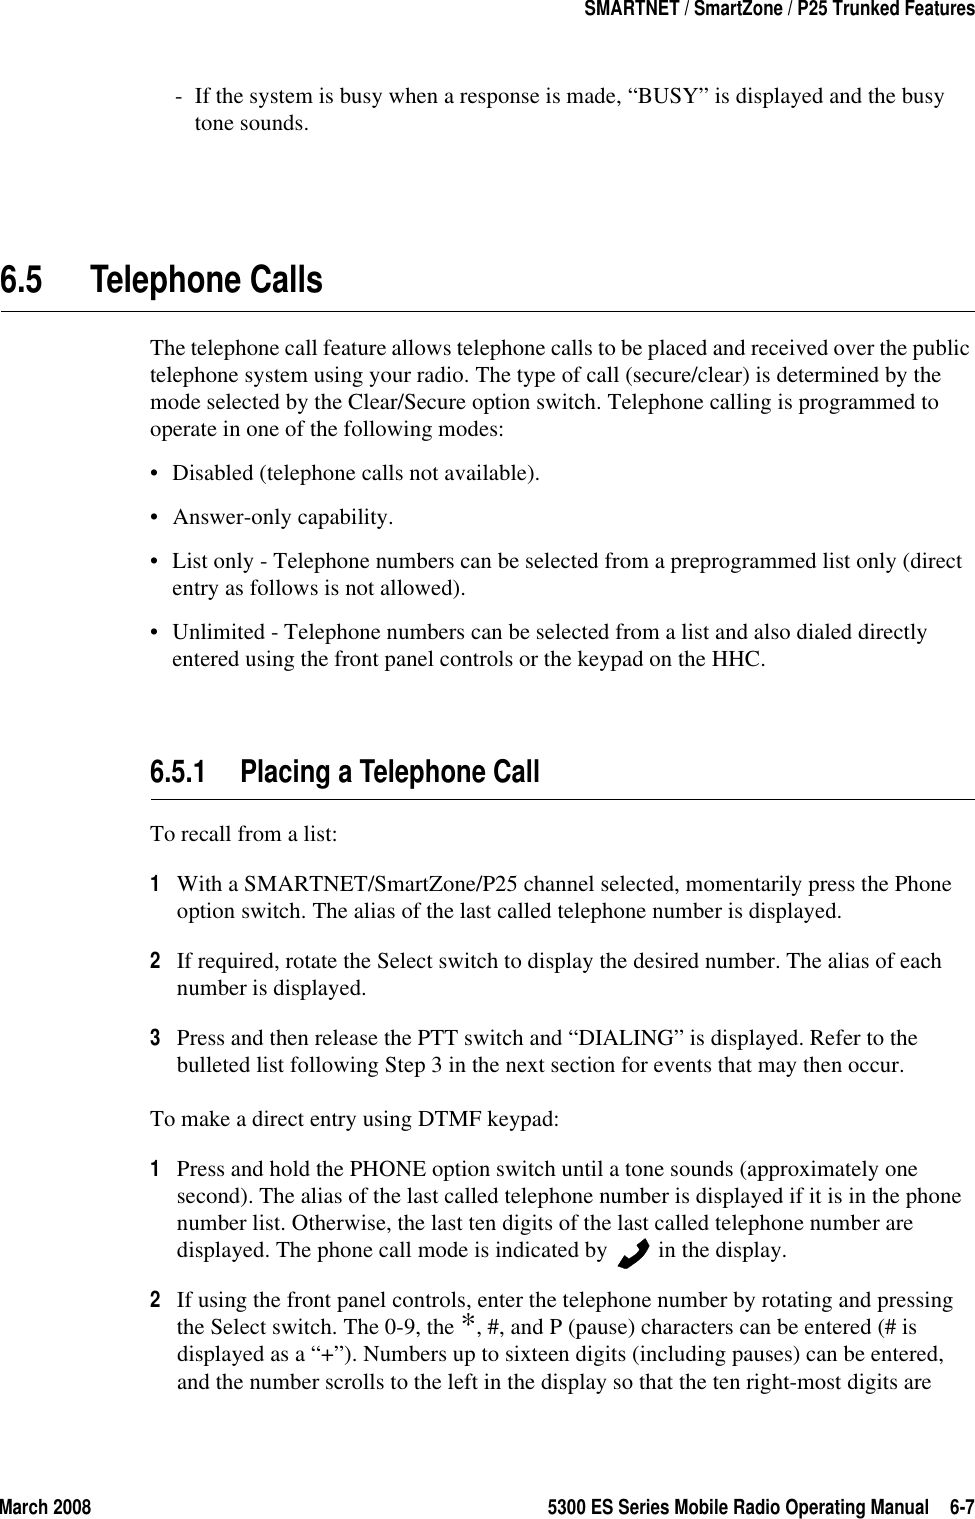 March 2008 5300 ES Series Mobile Radio Operating Manual 6-7SMARTNET / SmartZone / P25 Trunked Features- If the system is busy when a response is made, “BUSY” is displayed and the busy tone sounds.6.5 Telephone CallsThe telephone call feature allows telephone calls to be placed and received over the public telephone system using your radio. The type of call (secure/clear) is determined by the mode selected by the Clear/Secure option switch. Telephone calling is programmed to operate in one of the following modes:• Disabled (telephone calls not available).• Answer-only capability.• List only - Telephone numbers can be selected from a preprogrammed list only (direct entry as follows is not allowed).• Unlimited - Telephone numbers can be selected from a list and also dialed directly entered using the front panel controls or the keypad on the HHC.6.5.1 Placing a Telephone CallTo recall from a list:1With a SMARTNET/SmartZone/P25 channel selected, momentarily press the Phone option switch. The alias of the last called telephone number is displayed.2If required, rotate the Select switch to display the desired number. The alias of each number is displayed.3Press and then release the PTT switch and “DIALING” is displayed. Refer to the bulleted list following Step 3 in the next section for events that may then occur.To make a direct entry using DTMF keypad:1Press and hold the PHONE option switch until a tone sounds (approximately one second). The alias of the last called telephone number is displayed if it is in the phone number list. Otherwise, the last ten digits of the last called telephone number are displayed. The phone call mode is indicated by   in the display.2If using the front panel controls, enter the telephone number by rotating and pressing the Select switch. The 0-9, the *, #, and P (pause) characters can be entered (# is displayed as a “+”). Numbers up to sixteen digits (including pauses) can be entered, and the number scrolls to the left in the display so that the ten right-most digits are 